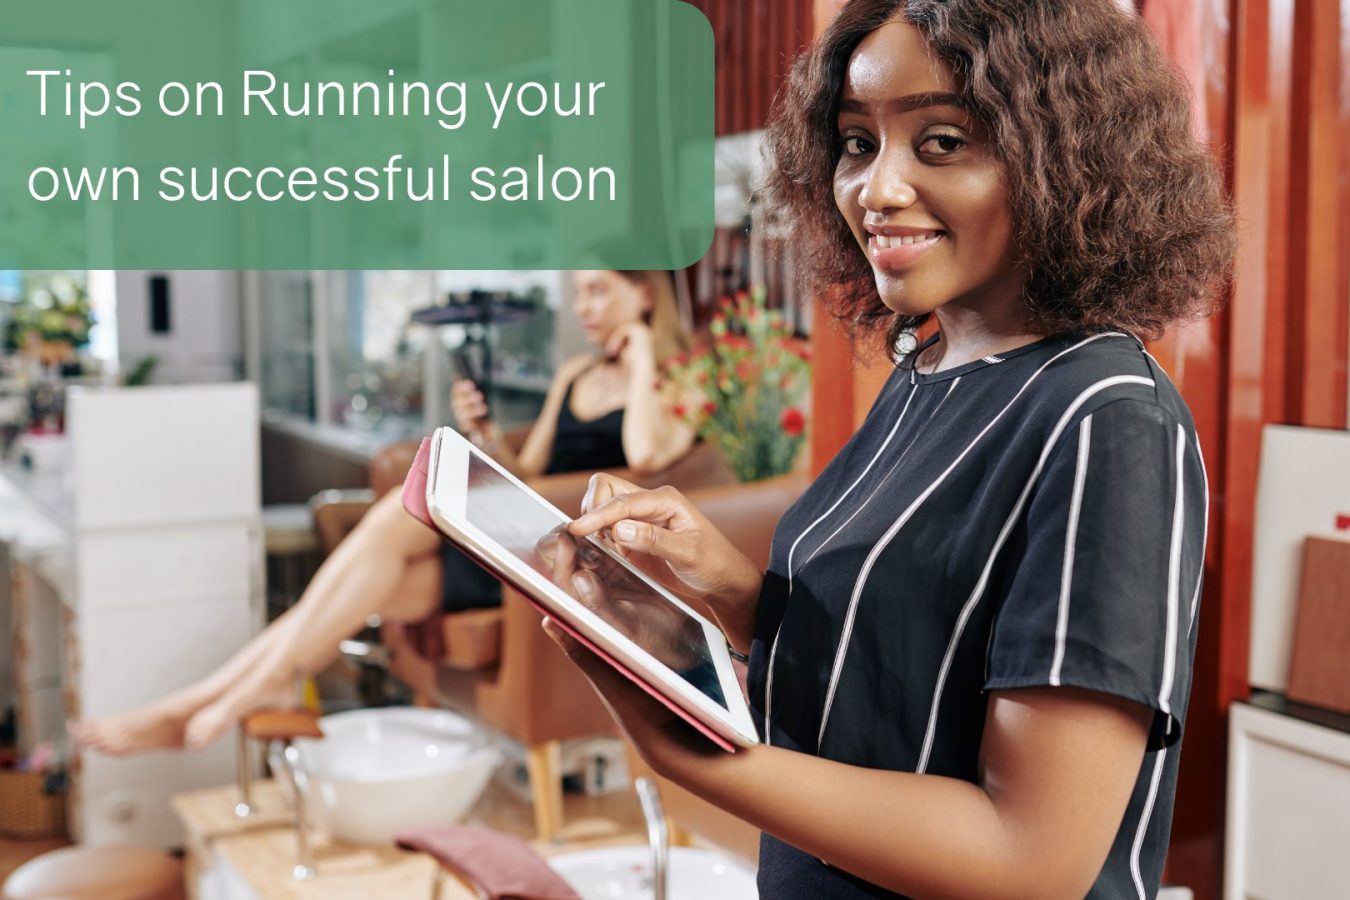 Tips on Running your own salon